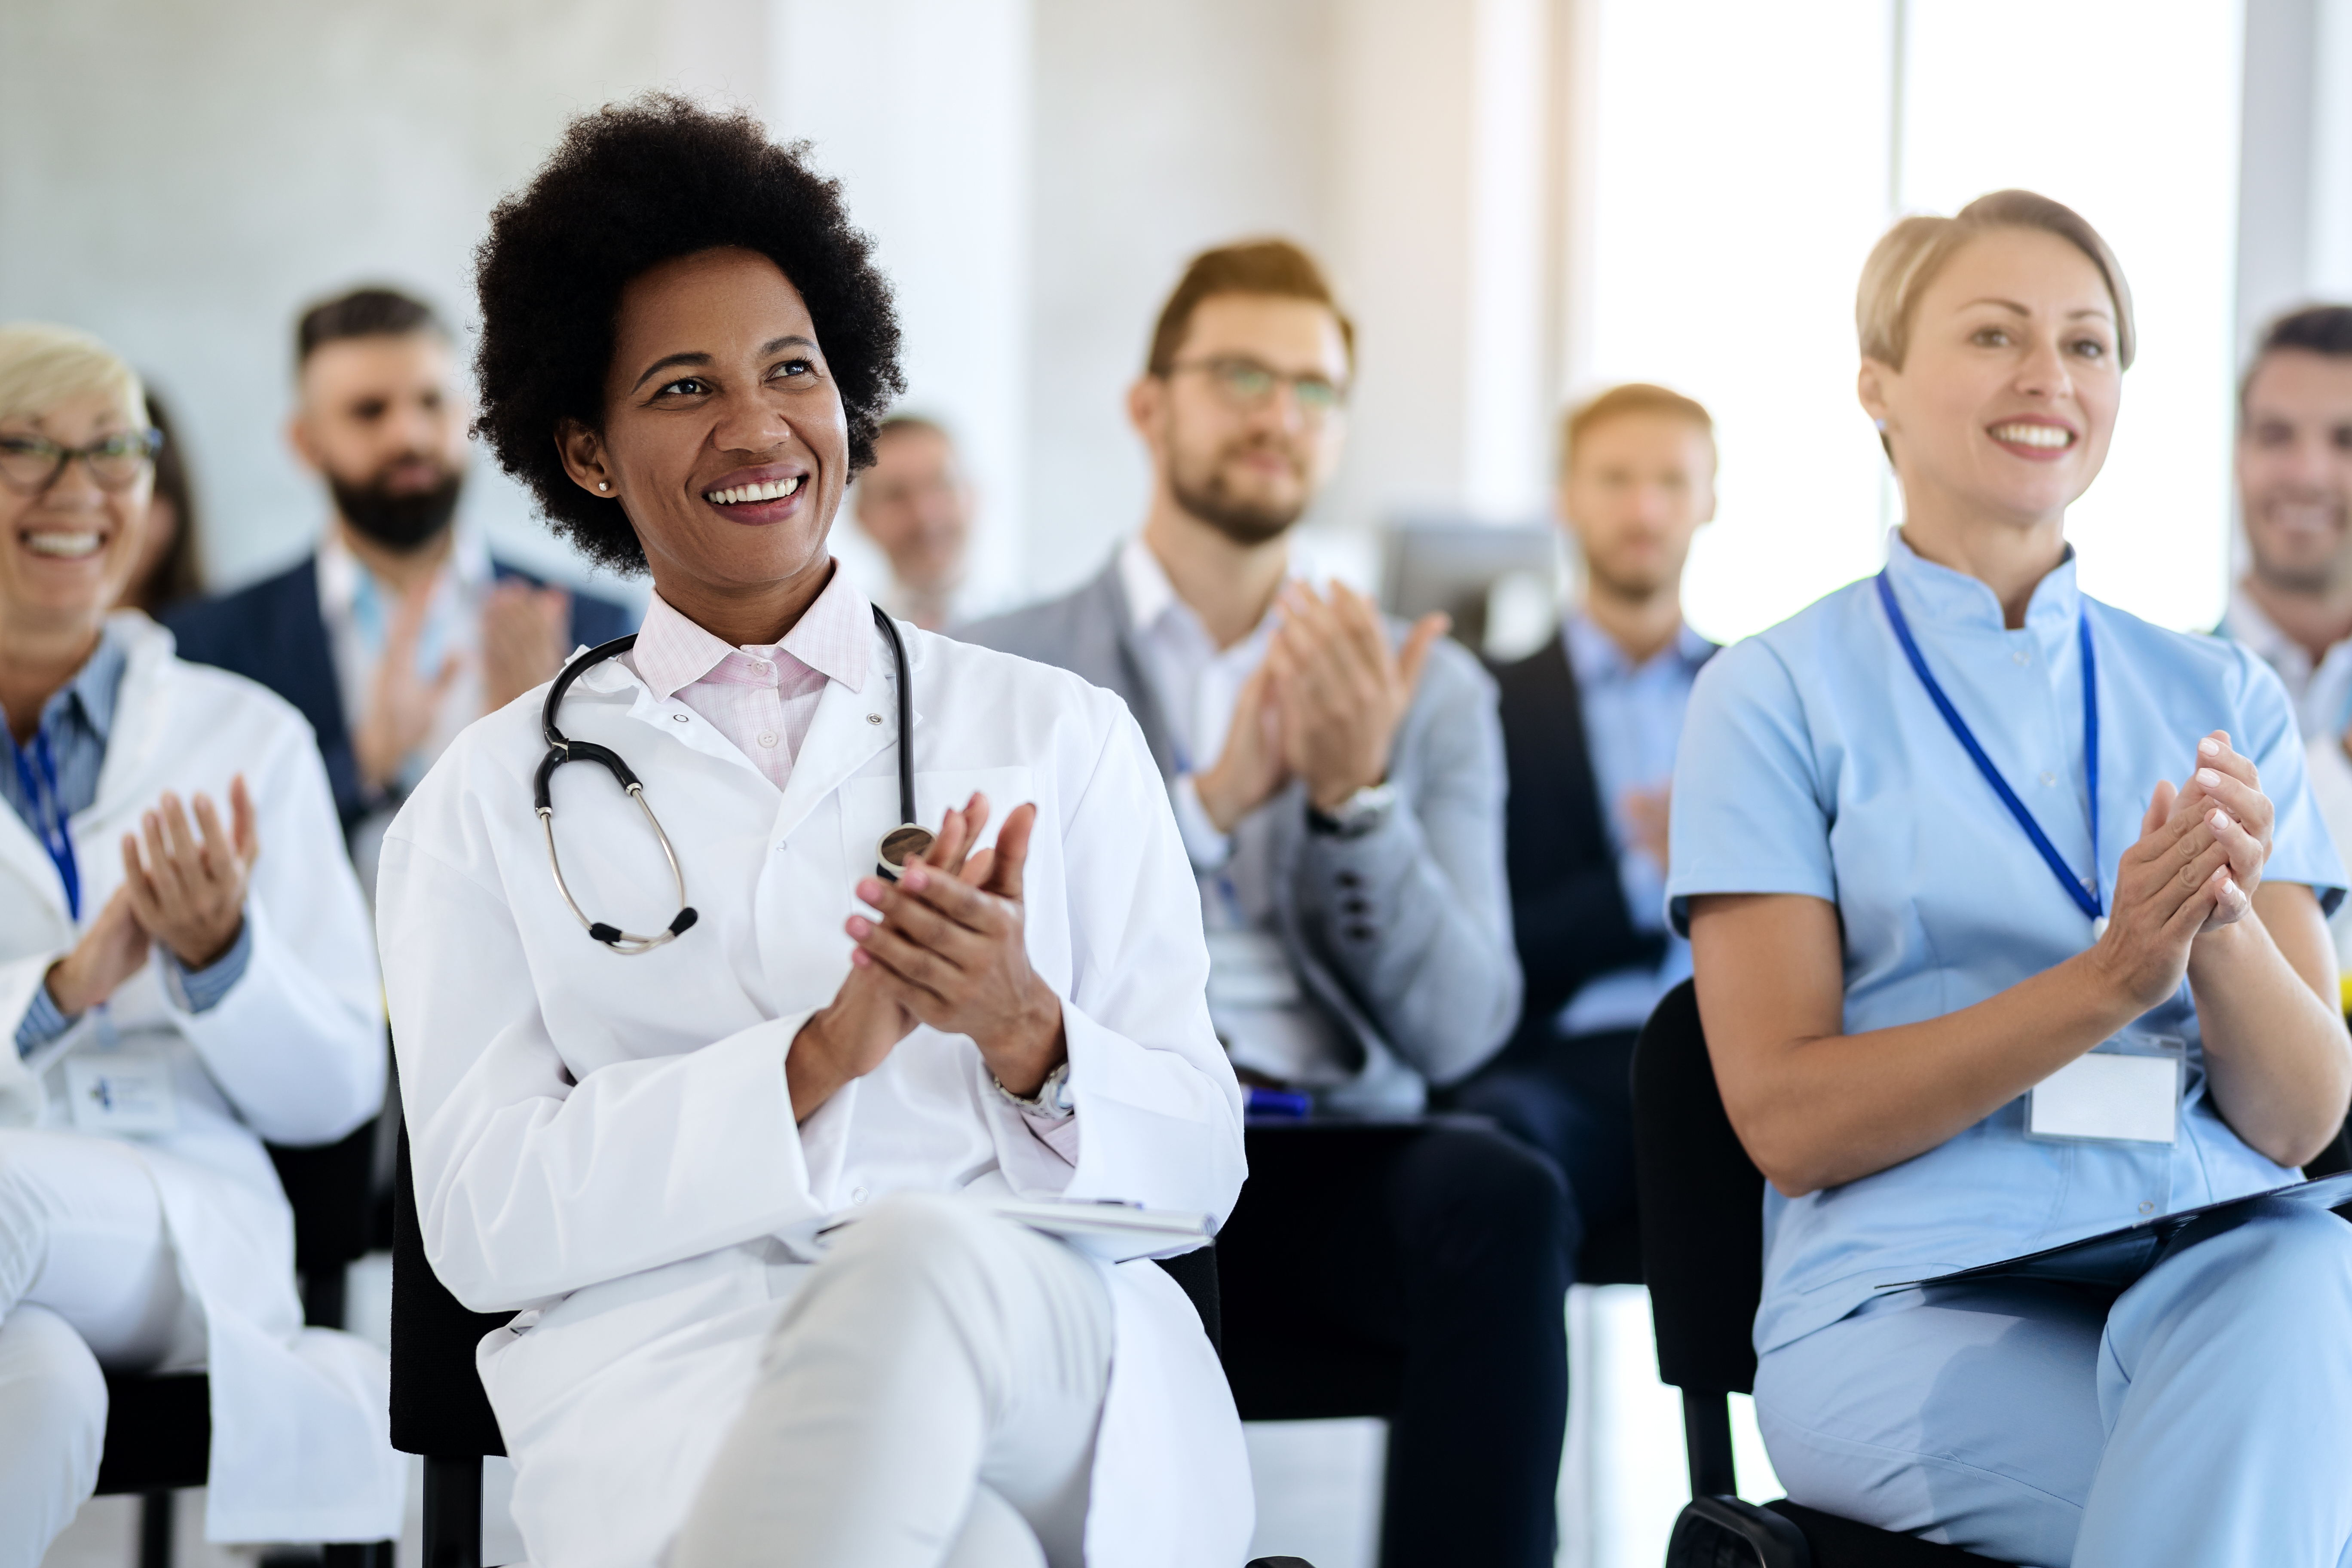 Doctors and medical professionals clap for a guest speaker